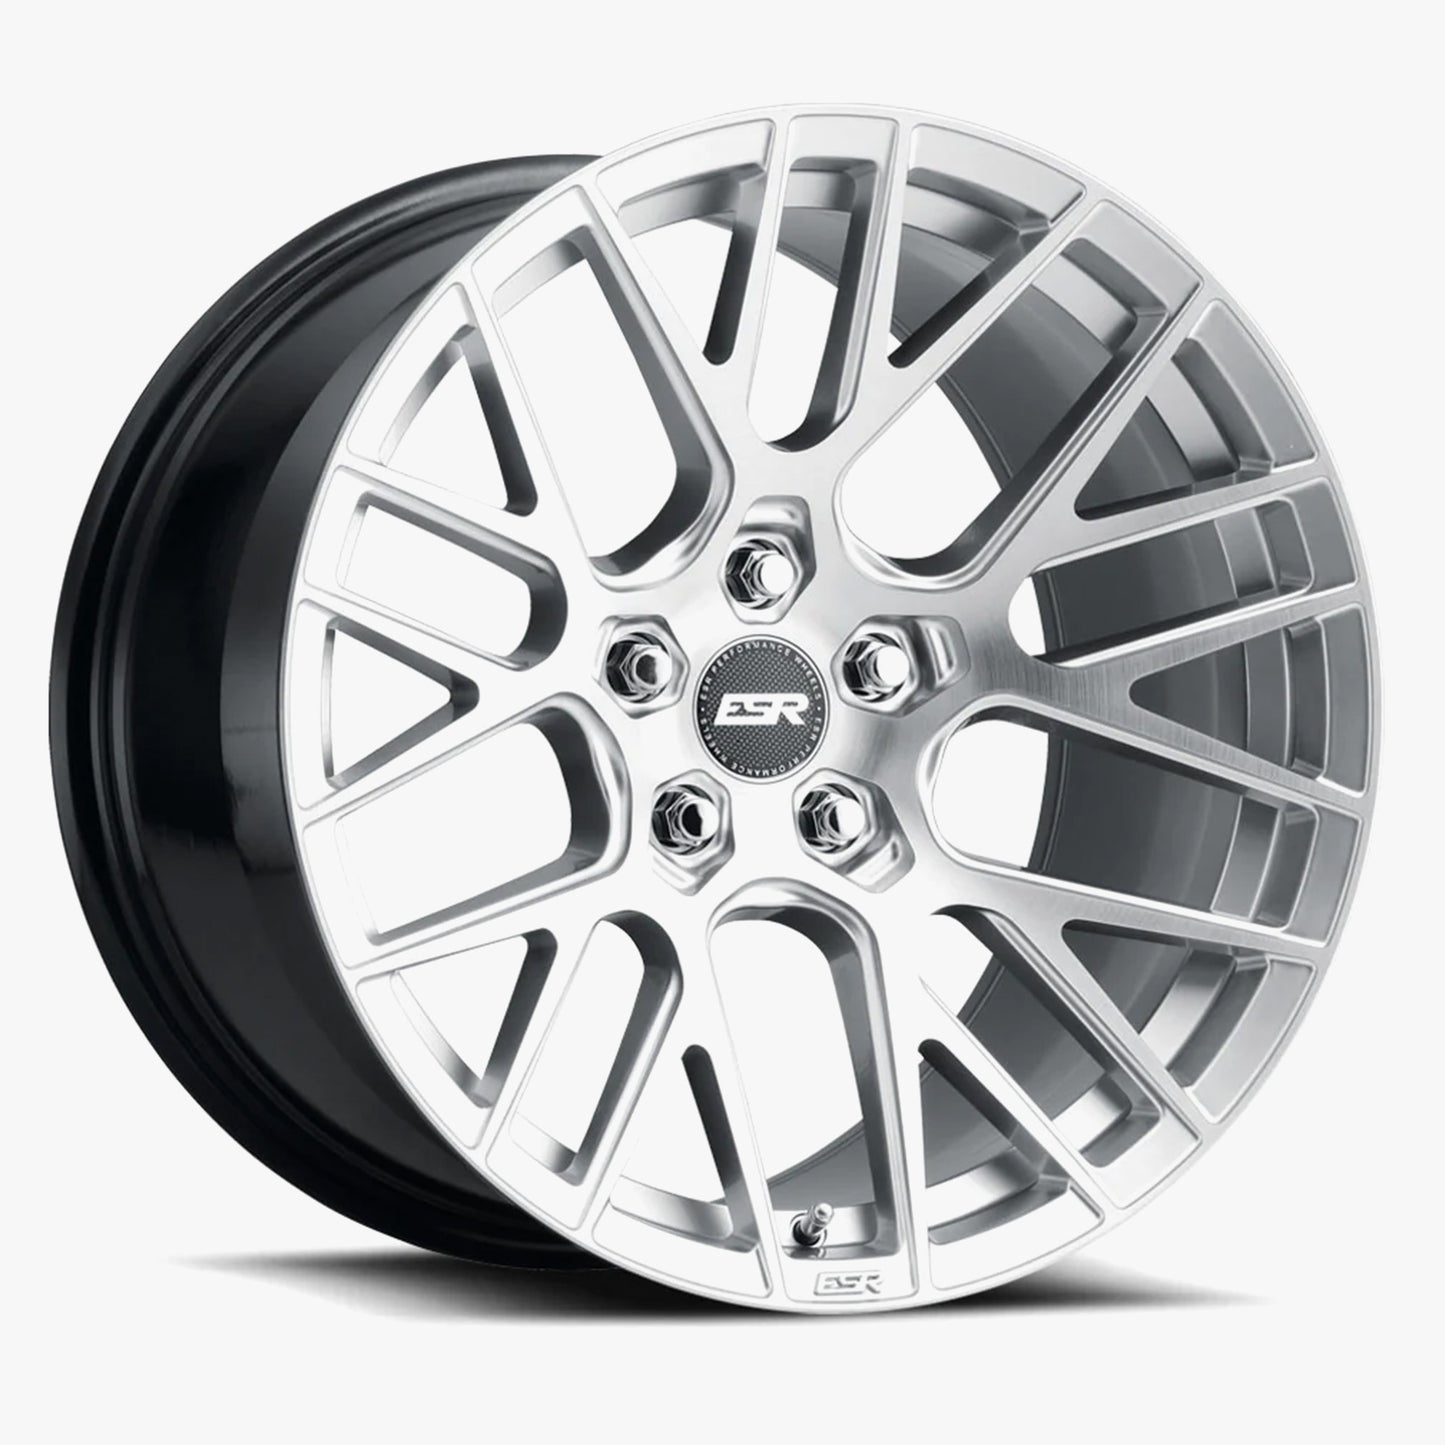 FORGETECH SERIES RF11 Brushed Hyper Silver Brushed Hyper Silver 20x10.5 +40 5x114.3